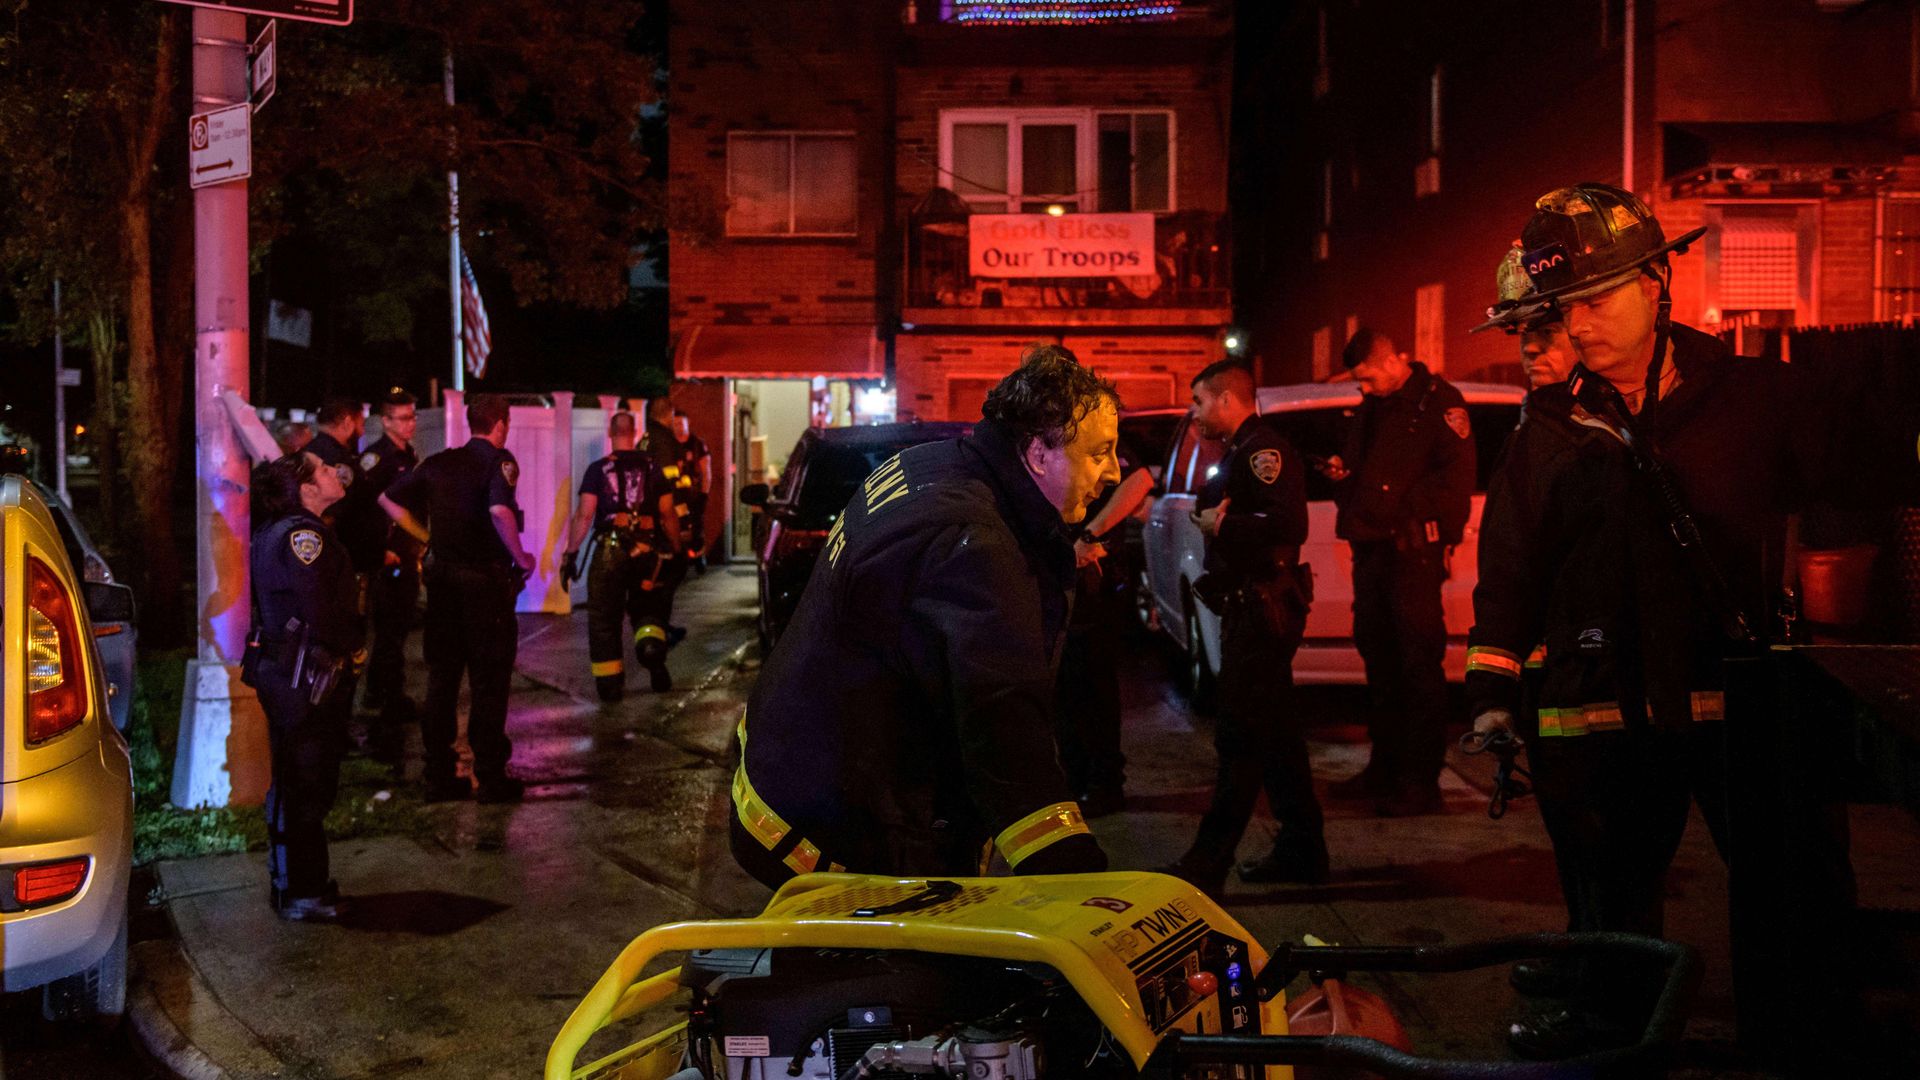 Police officers and rescue workers gather outside a house where a person was trapped in a flooded basement in Queens, New York early on September 2, 2021